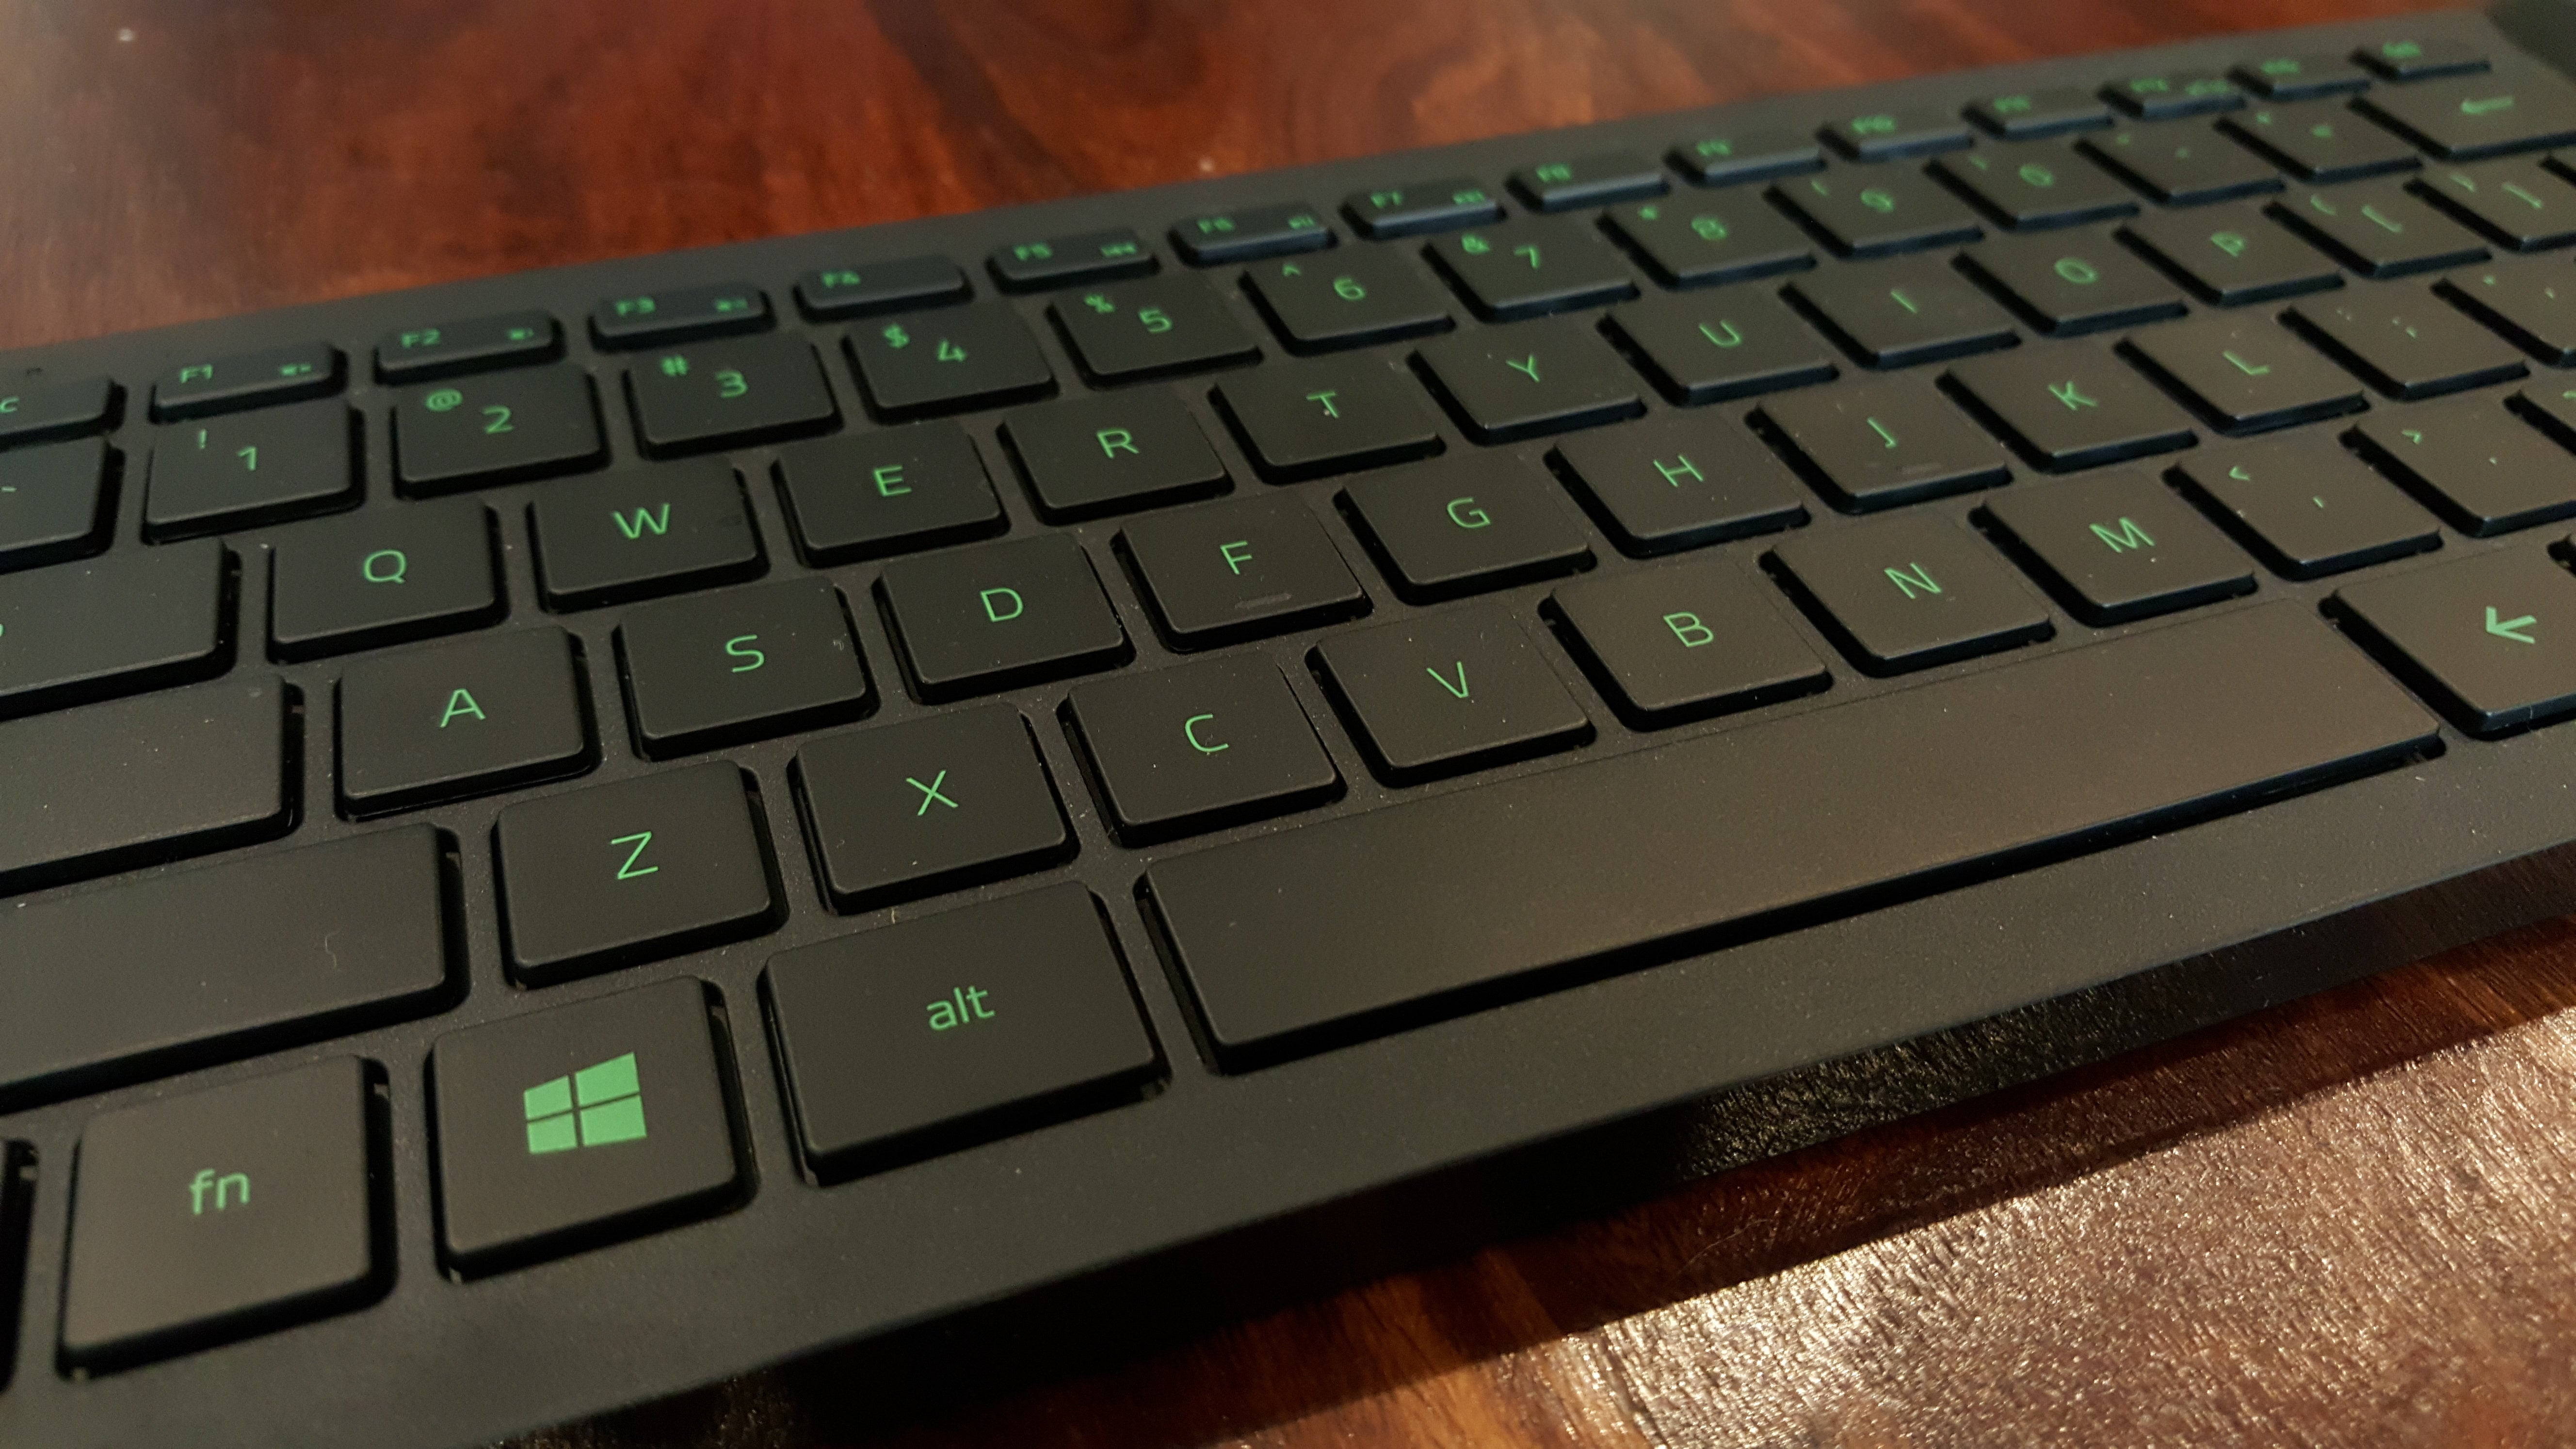 Razer Turret for Xbox One now available, here's our unboxing and